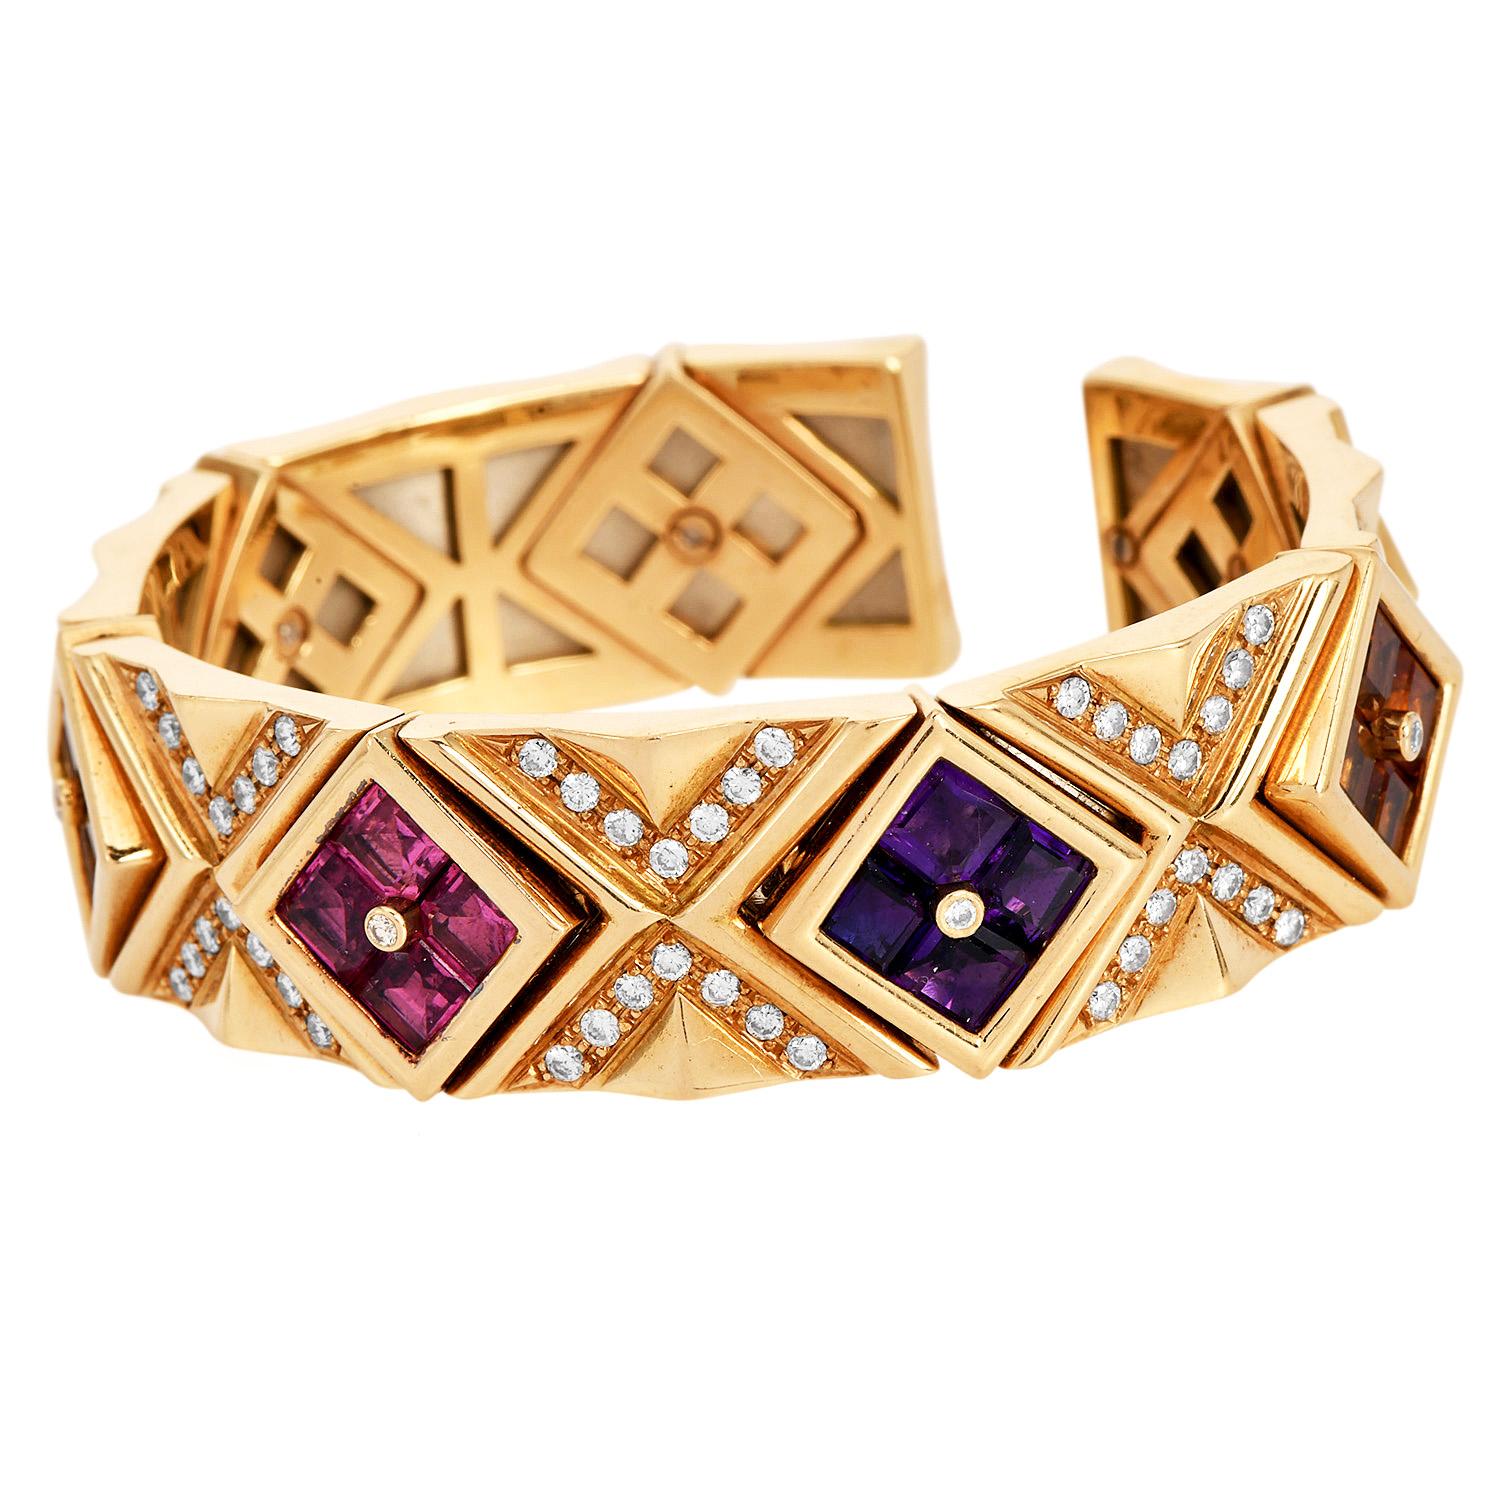 A statement piece designed to complement a luxurious necklace and earring set. Each statement square link interlocks in a symphony of geometric grace, invisibly set with square multi-gemstones such as amethyst, citrine, tourmaline, and topaz.

The